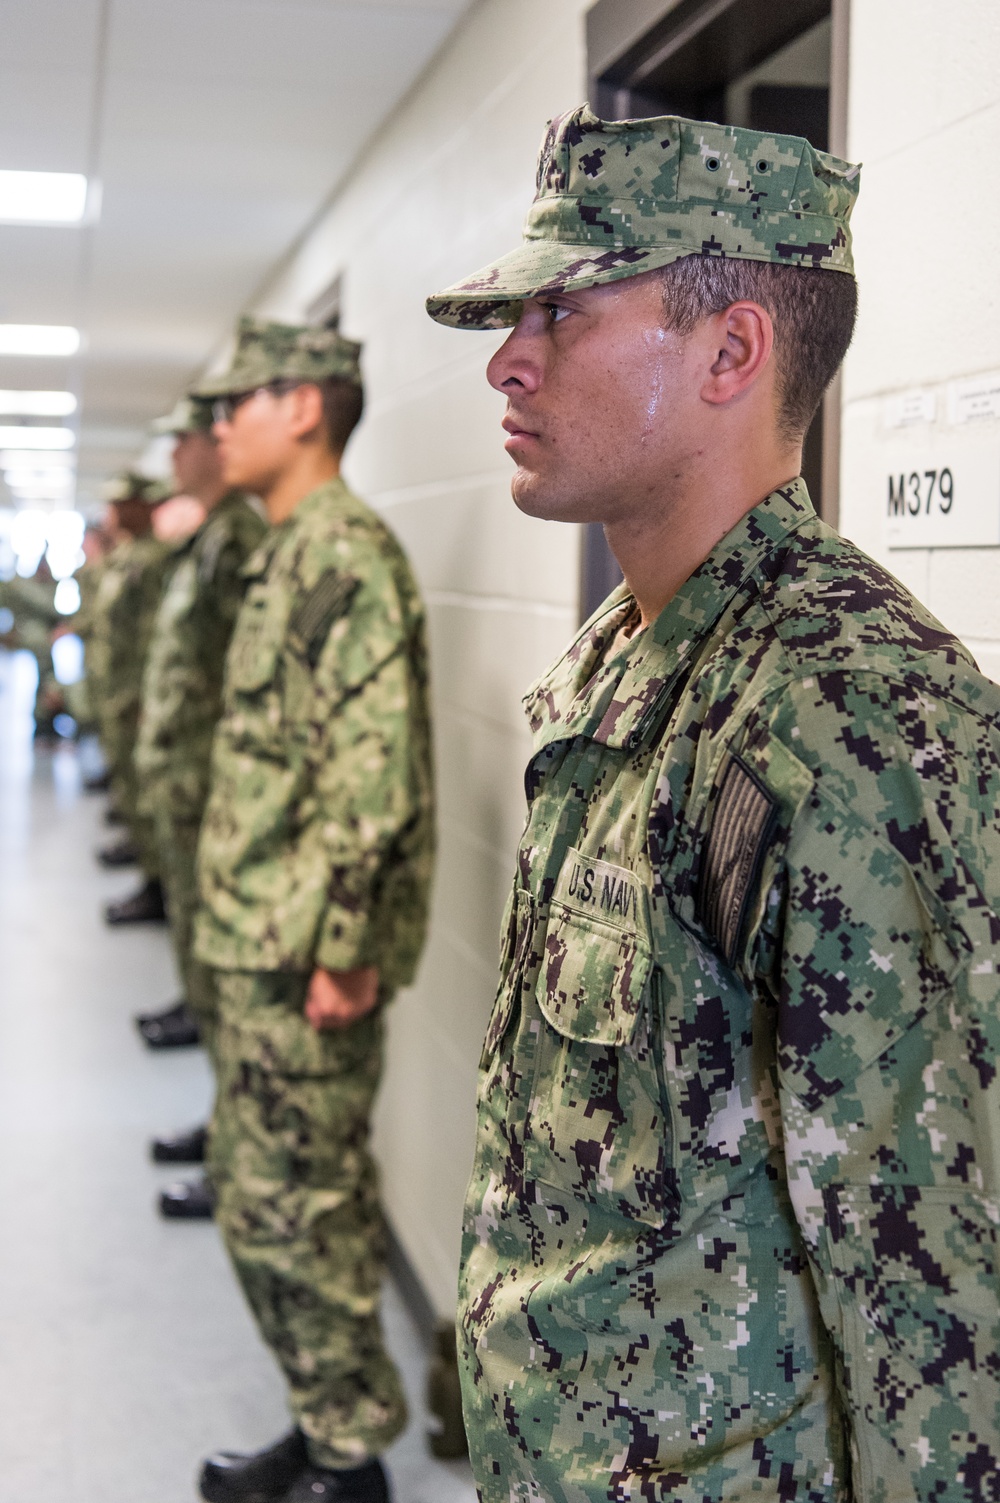 191115-N-TE695-0005 NEWPORT, R.I. (Oct. 31, 2019) -- Navy Officer Candidate School conducts a uniform inspection